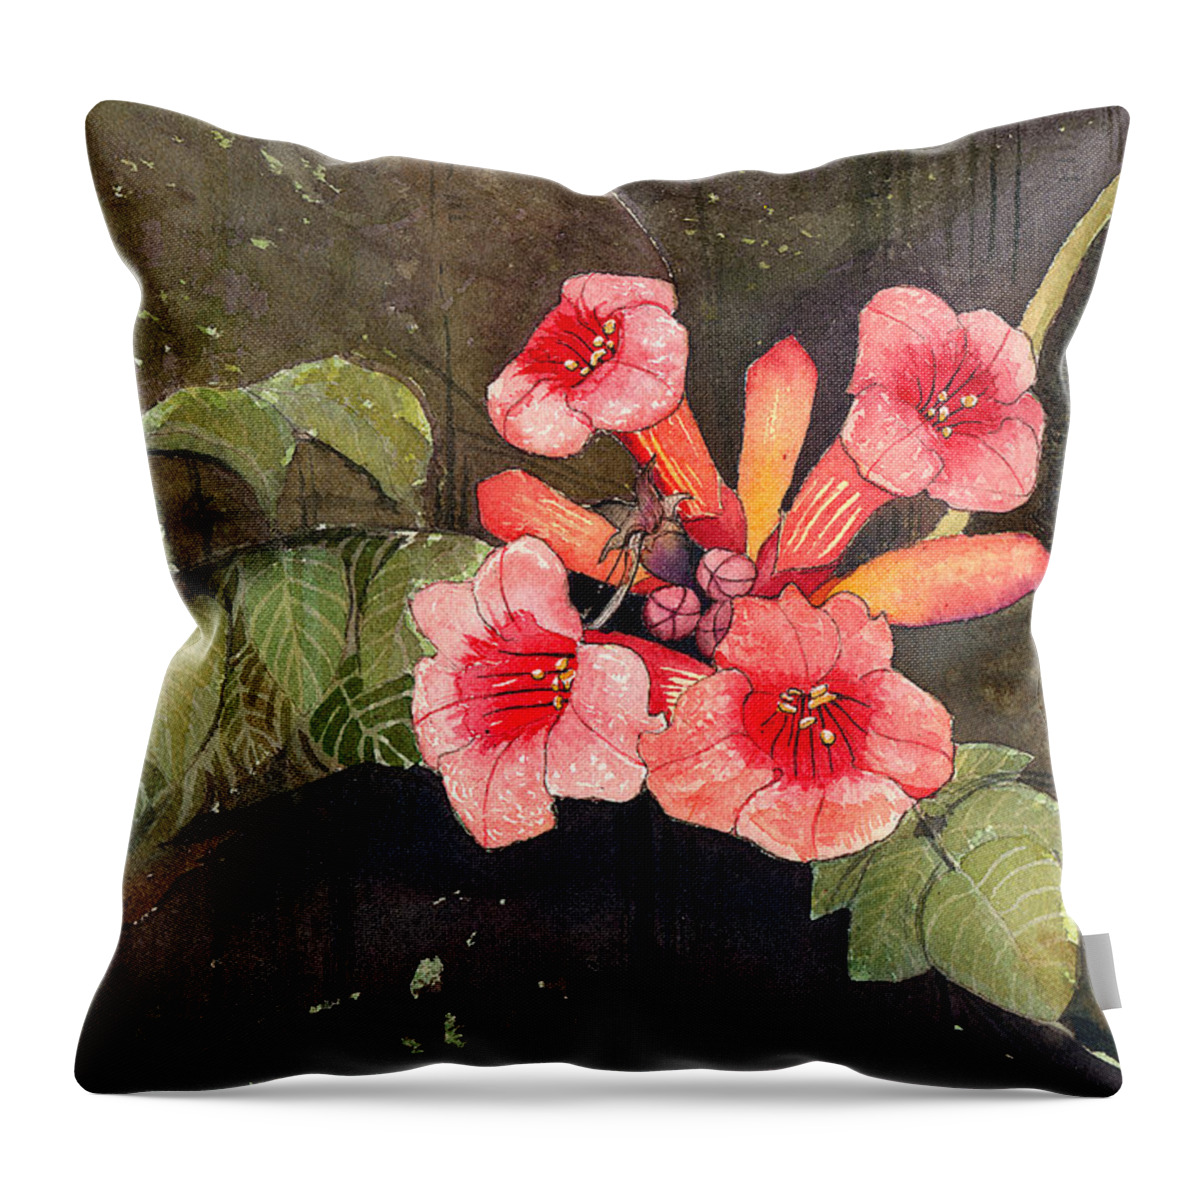 Trumpet Vine Throw Pillow featuring the painting Trumpet Vine II by Katherine Miller